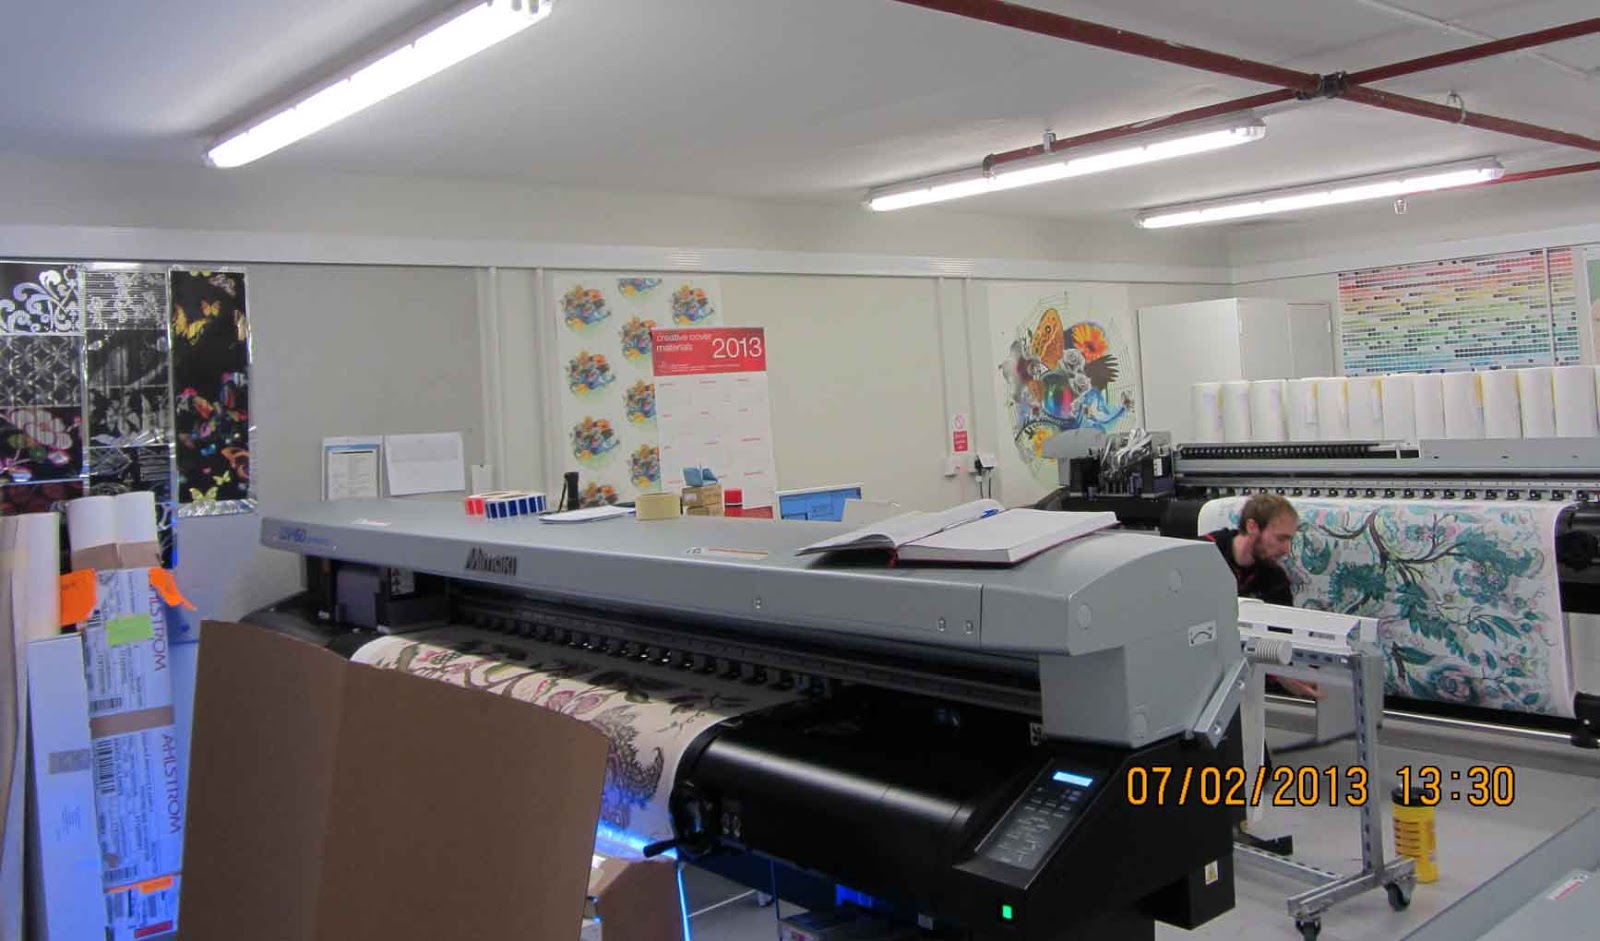 Then Finally Went On To See The Heatembossing Printed Vinyls Machine